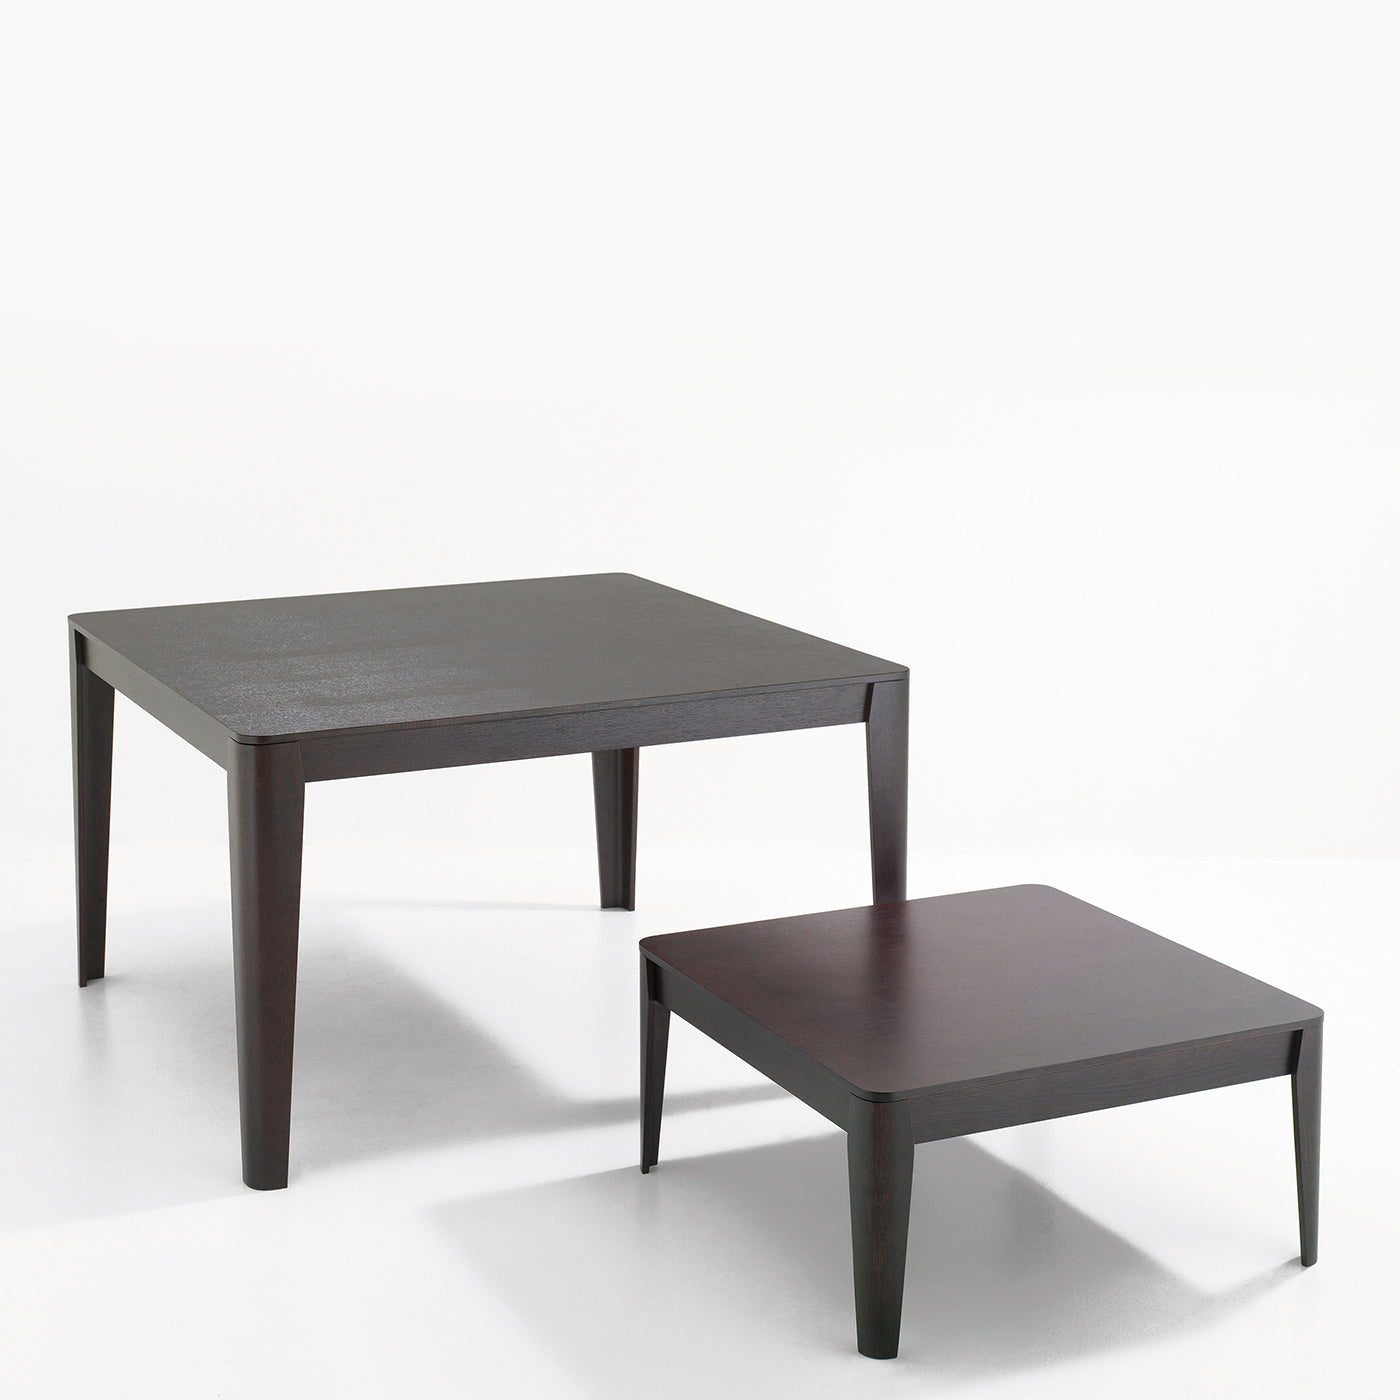 Compensato Dark-Durmast-Finished Dining Table by Angelo Mangiarotti - Alternative view 1